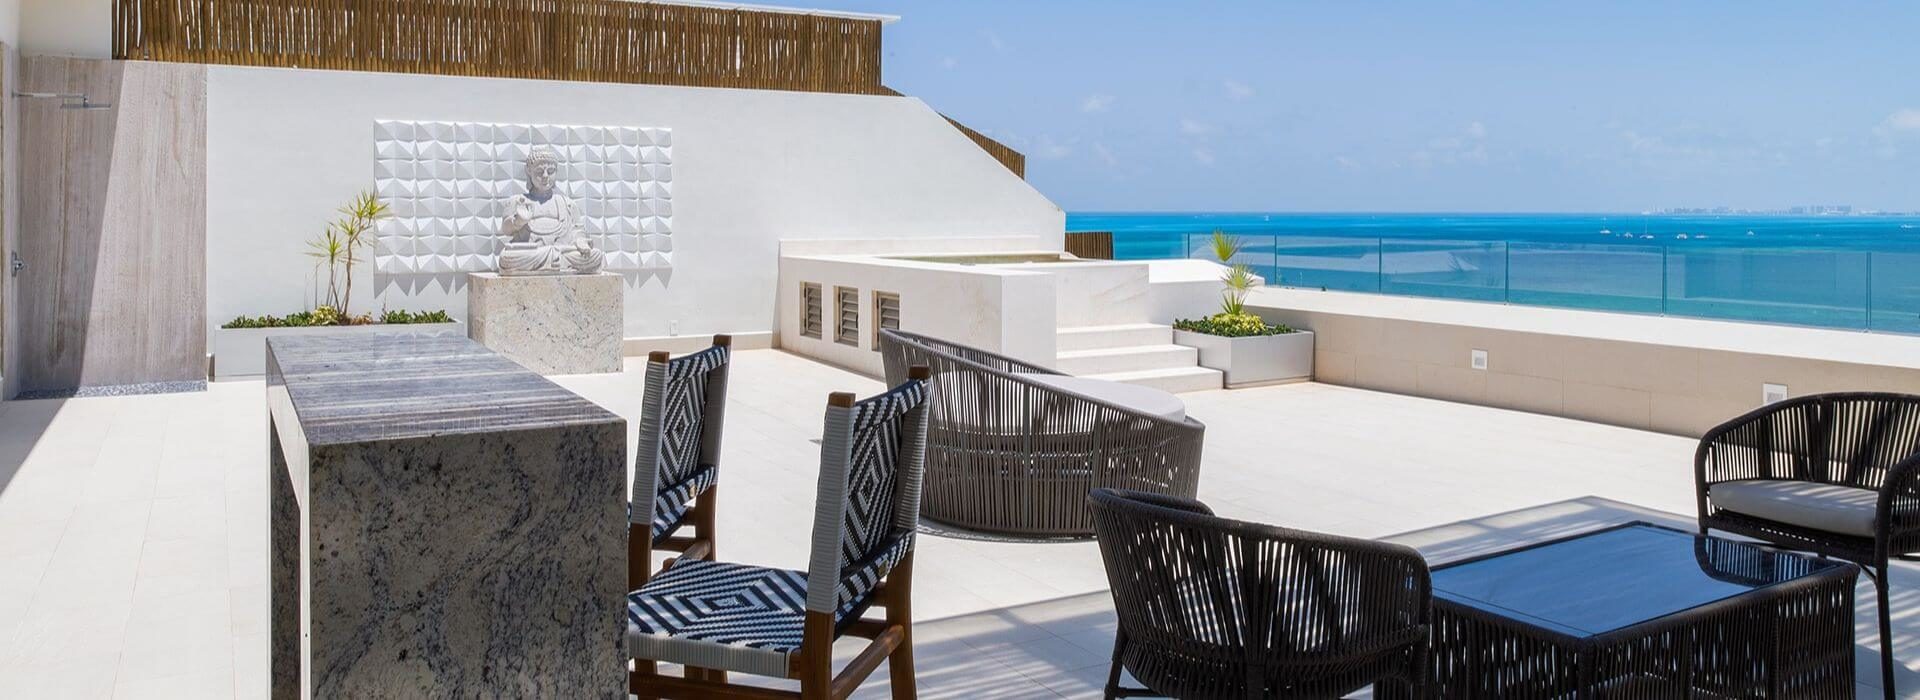 Rooftop terrace with patio furniture, lounge areas, a bar, a hot tub, and turquoise ocean views with blue skies